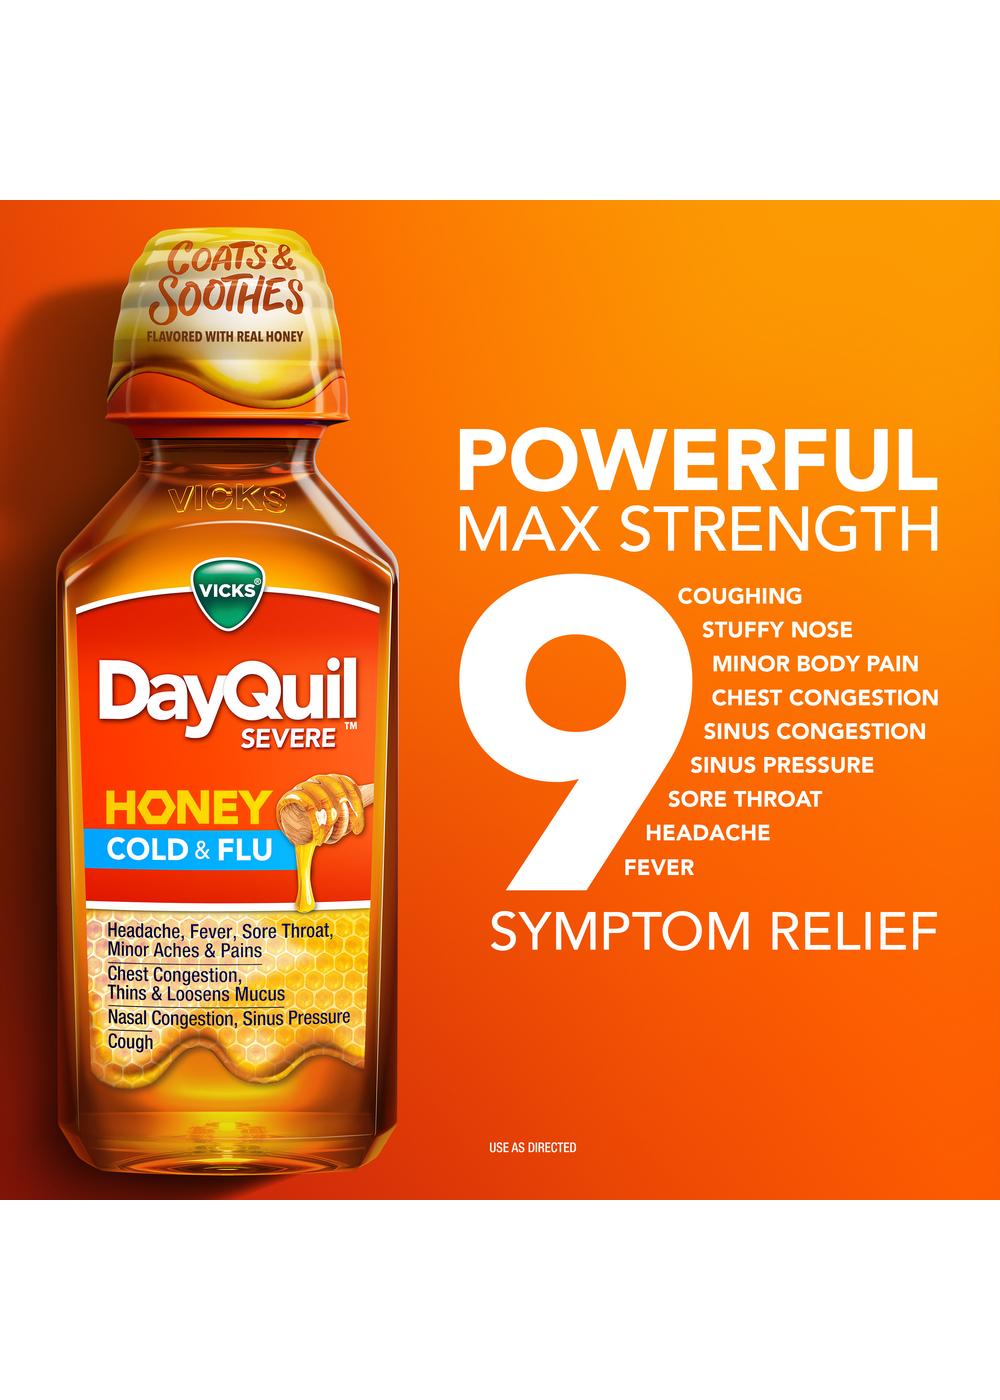 Vicks DayQuil SEVERE Cold & Flu Liquid - Honey; image 10 of 11